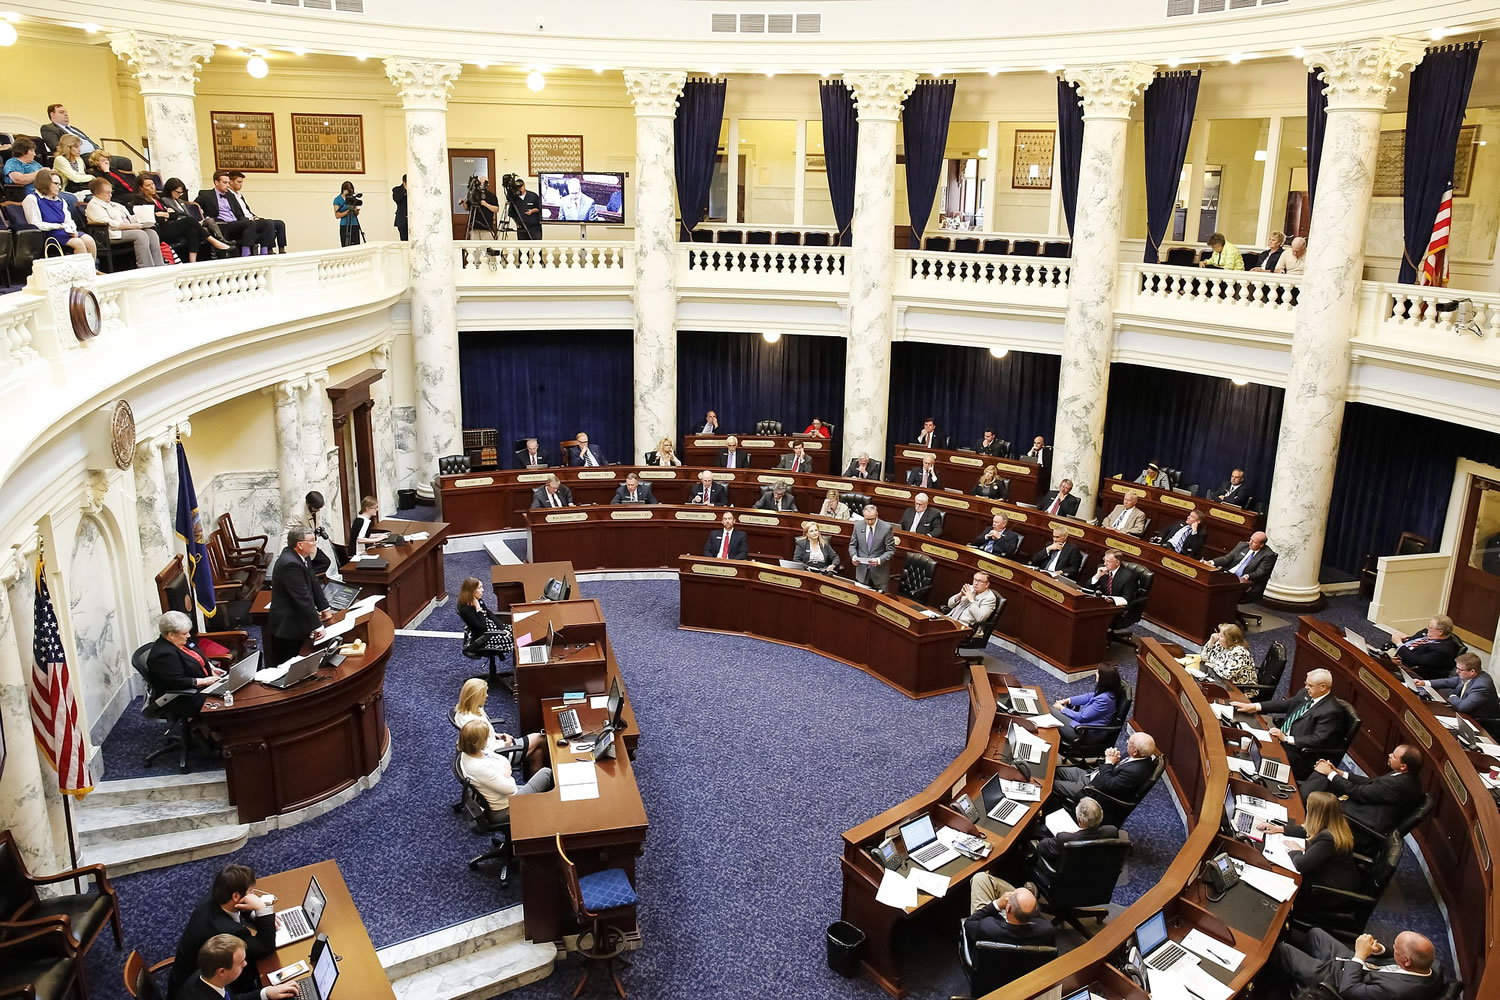 The Idaho House debates the child support enforcement bill during a special session of the Idaho Legislature at the state Capitol building on Monday in Boise, Idaho.